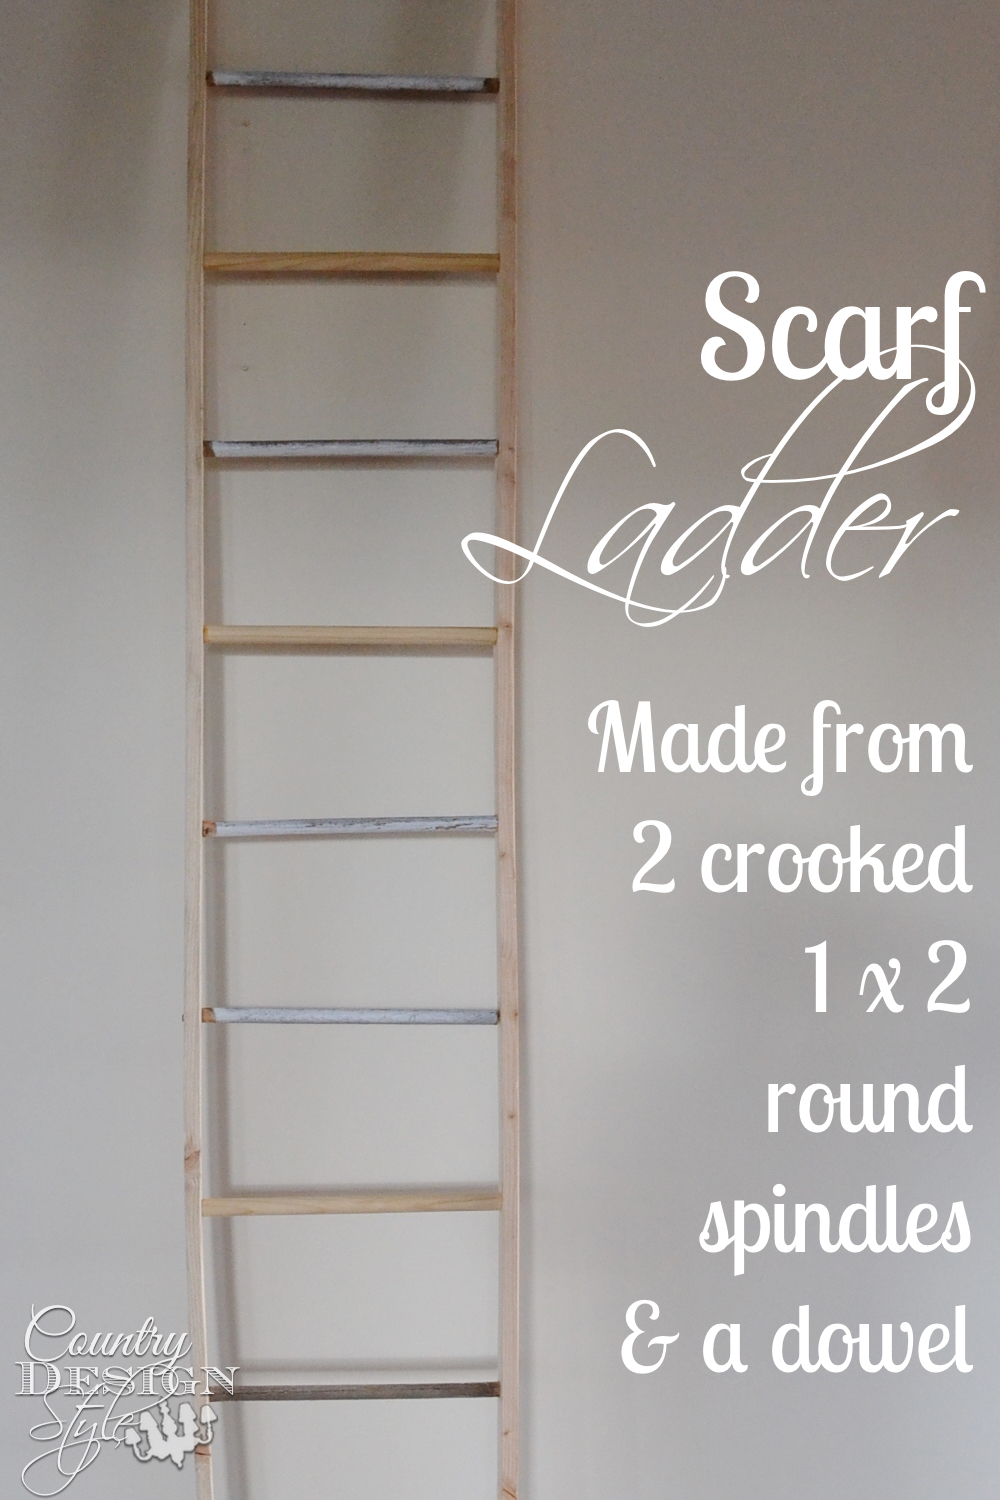 Scarf ladder for organizing scarves. A simple DIY project using scrap pieces and even crooked wood. Country Design Style